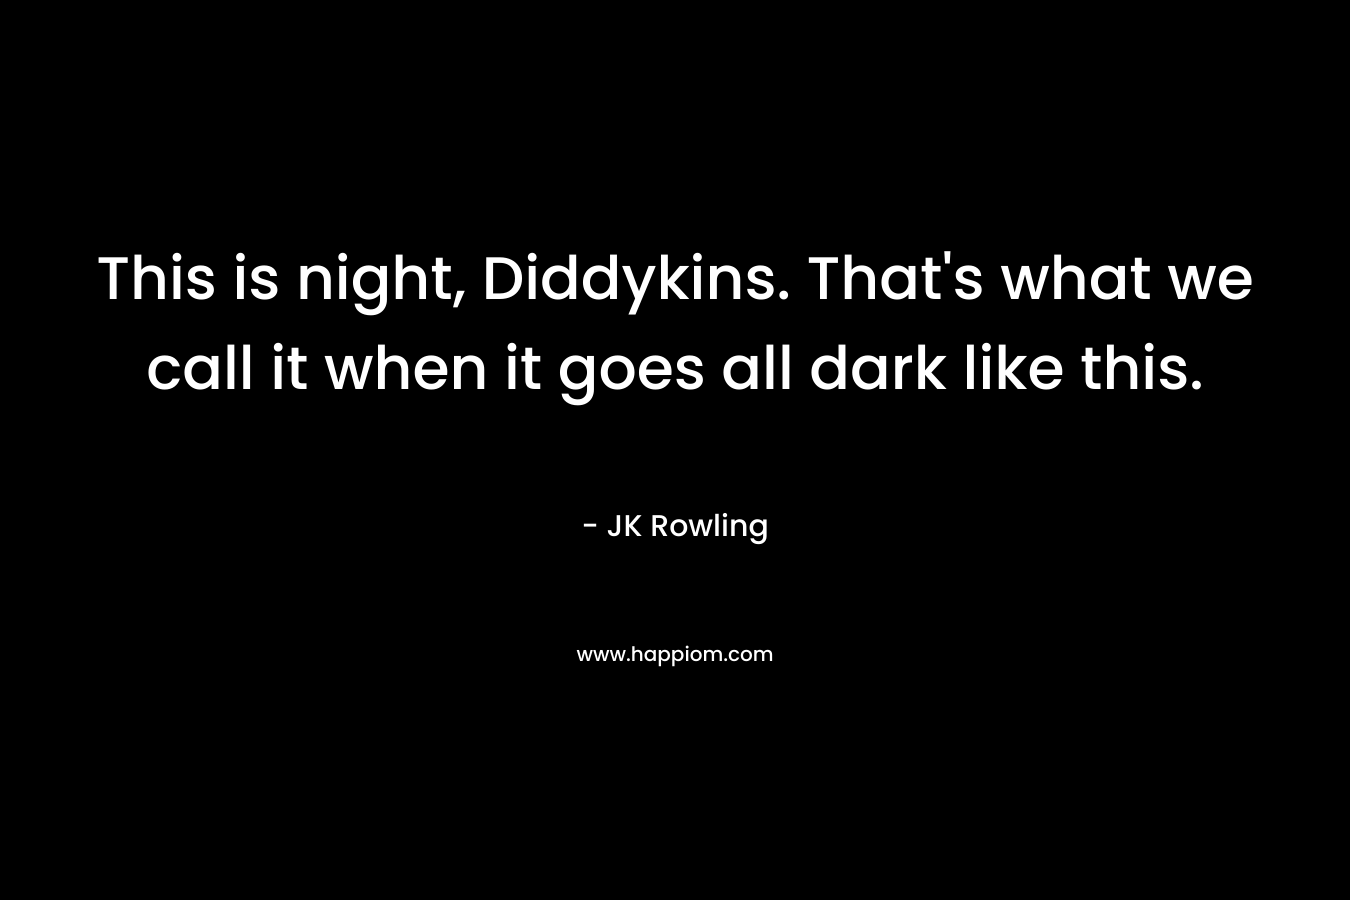 This is night, Diddykins. That’s what we call it when it goes all dark like this.  – JK Rowling